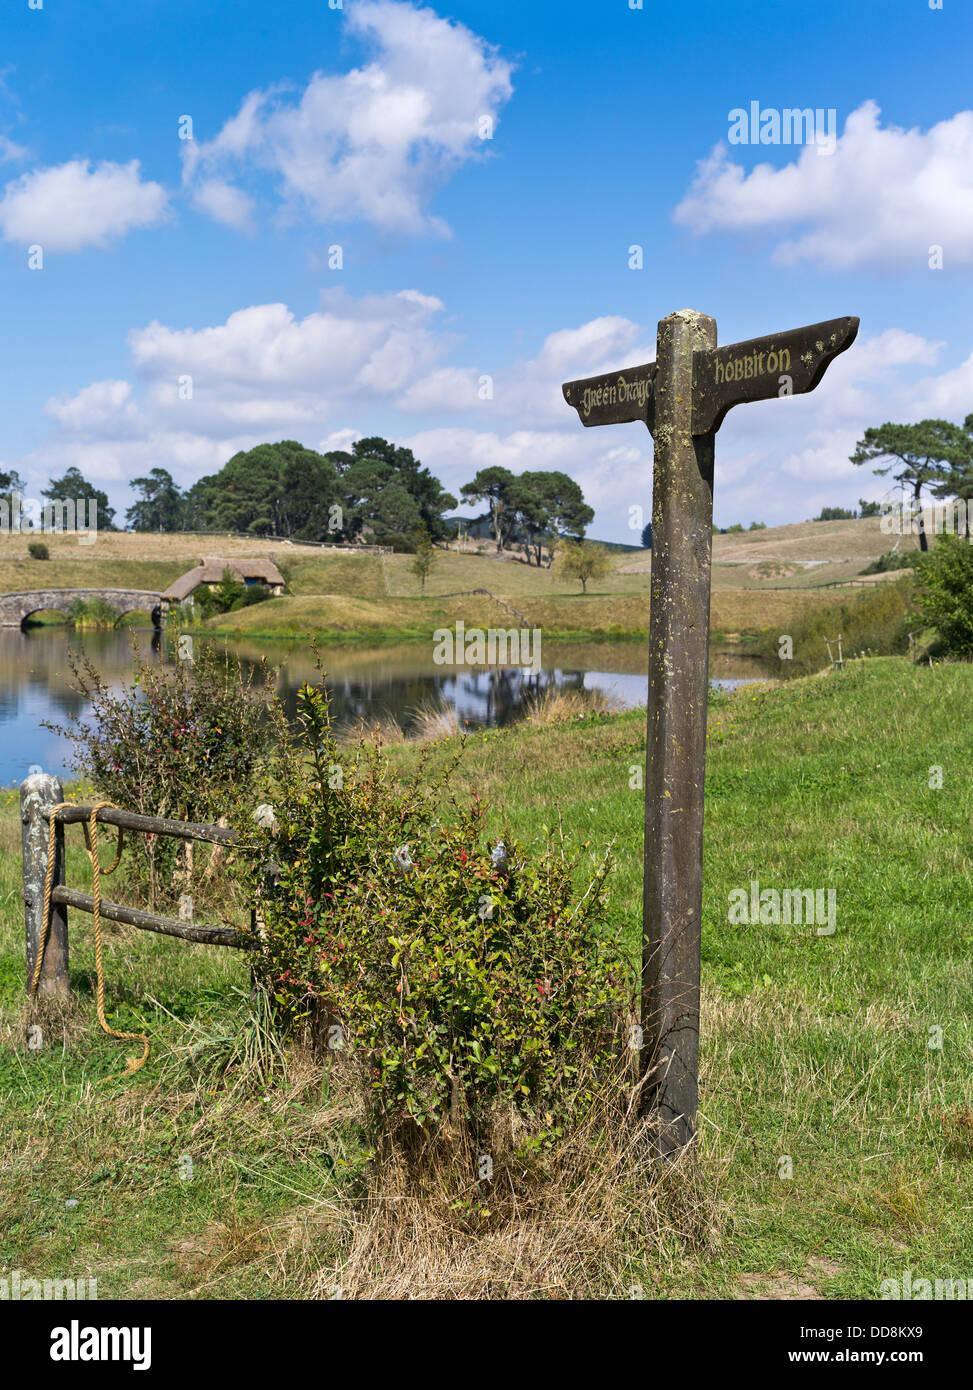 dh Lord of the Rings HOBBITON NEW ZEALAND Hobbiton Green Dragon signpost film set movie site middle earth rings Stock Photo